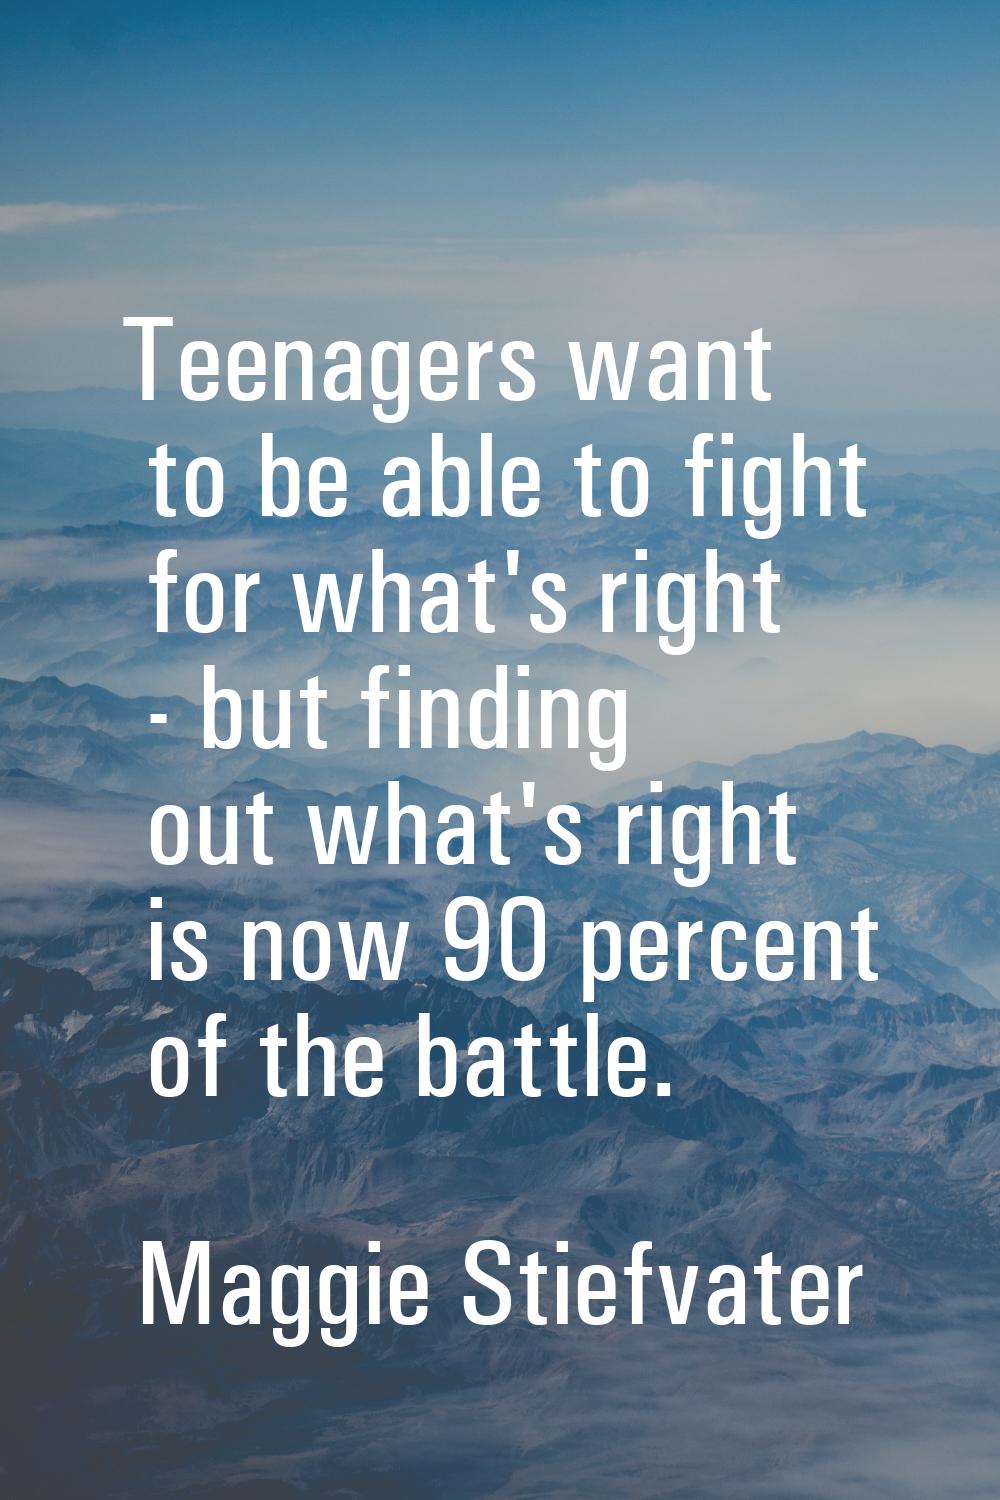 Teenagers want to be able to fight for what's right - but finding out what's right is now 90 percen